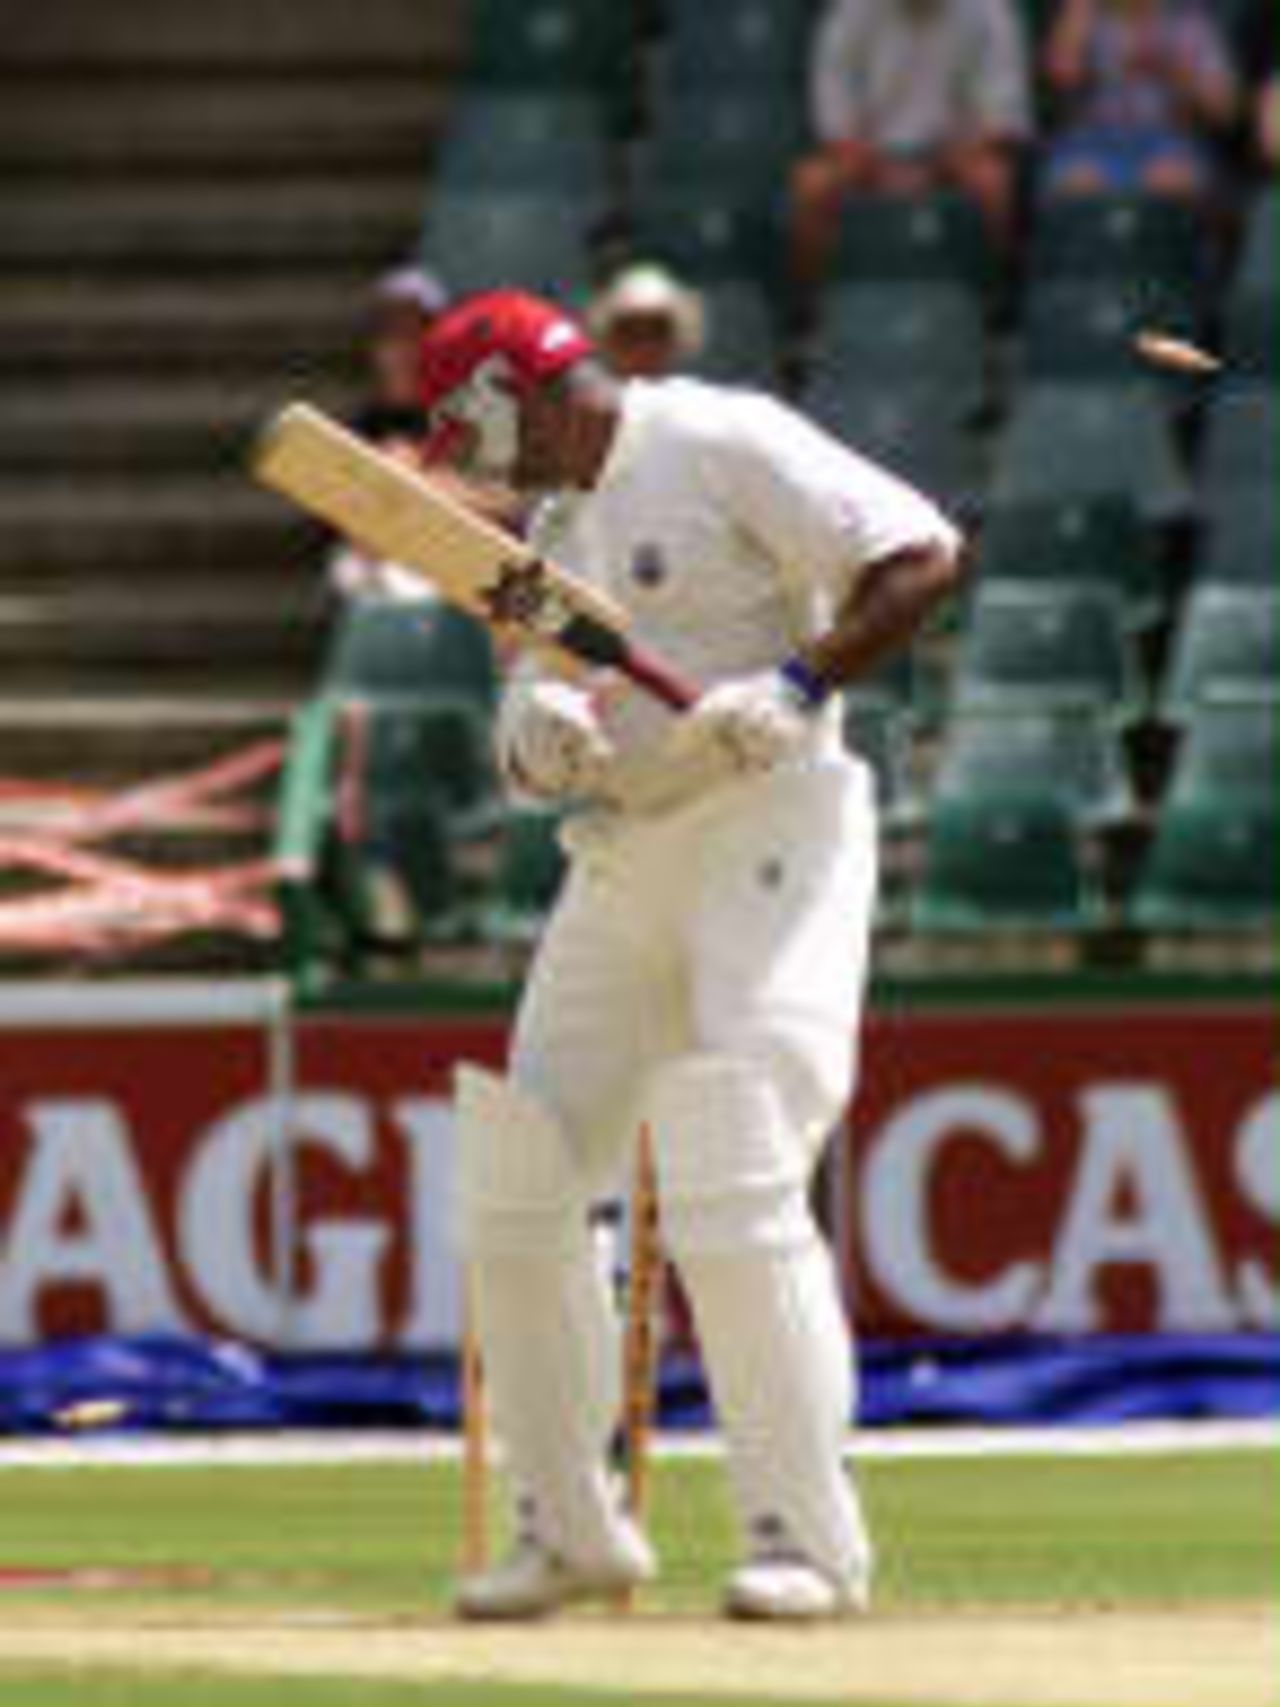 Philo Wallace is bowled by Pollock West Indies in South Africa, 1998/99, 1st Test South Africa v West Indies The Wanderers, Johannesburg 28 November 1998